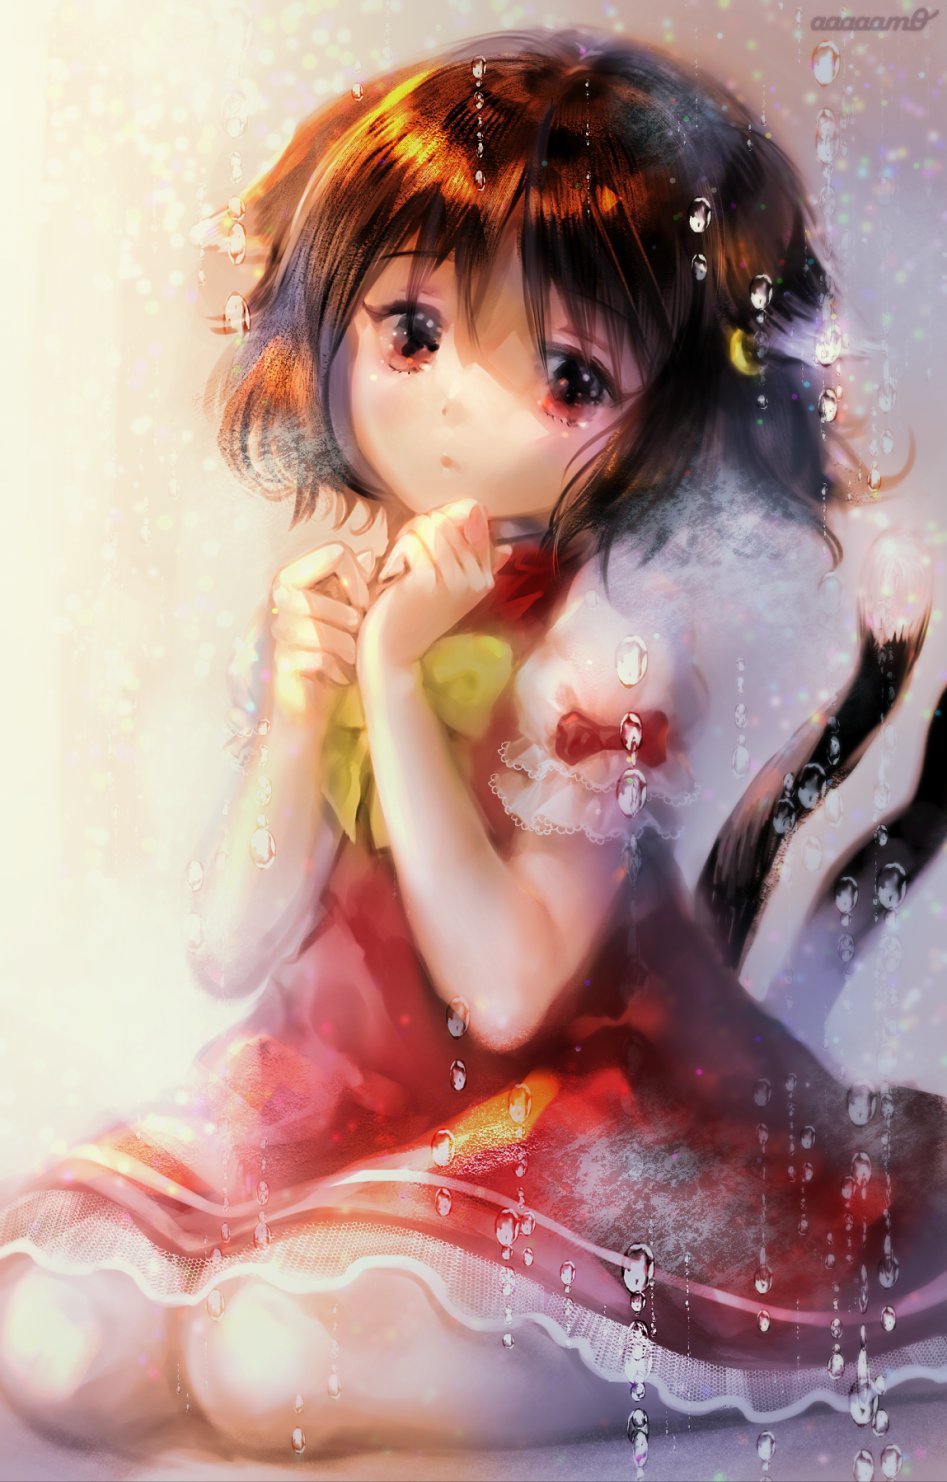 __chen_touhou_drawn_by_amo__964b43aed139233b2224039a7abcfb4d.png